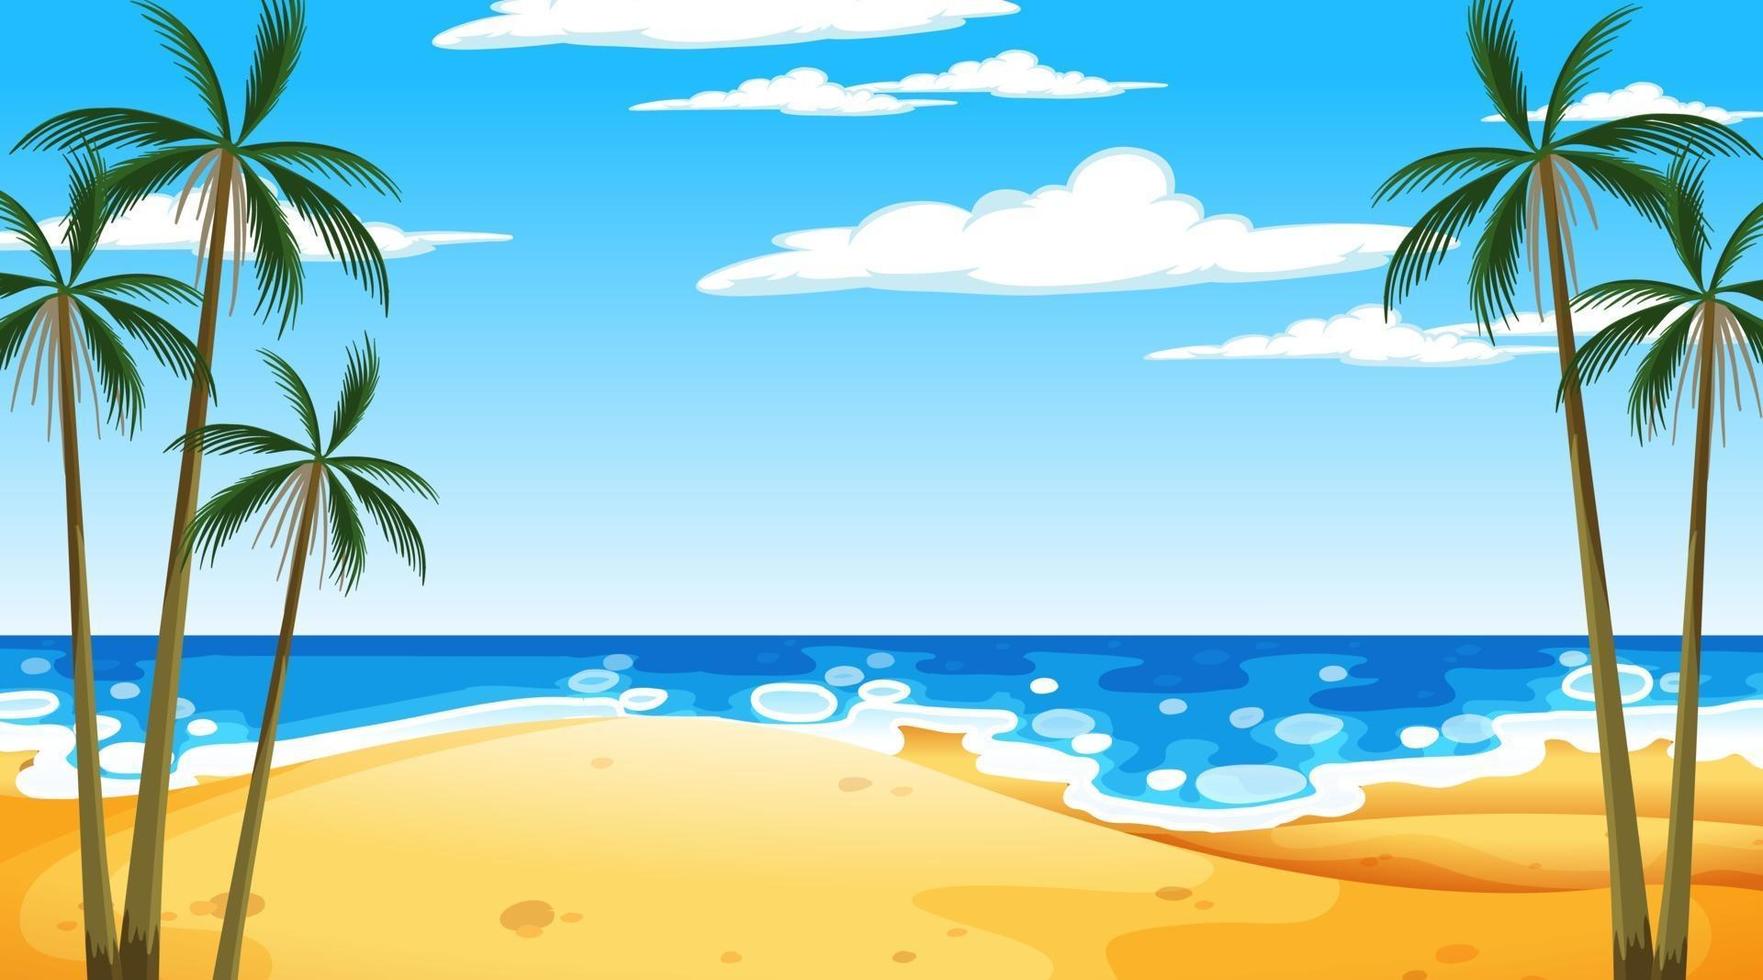 Beach at daytime landscape scene with palm tree vector